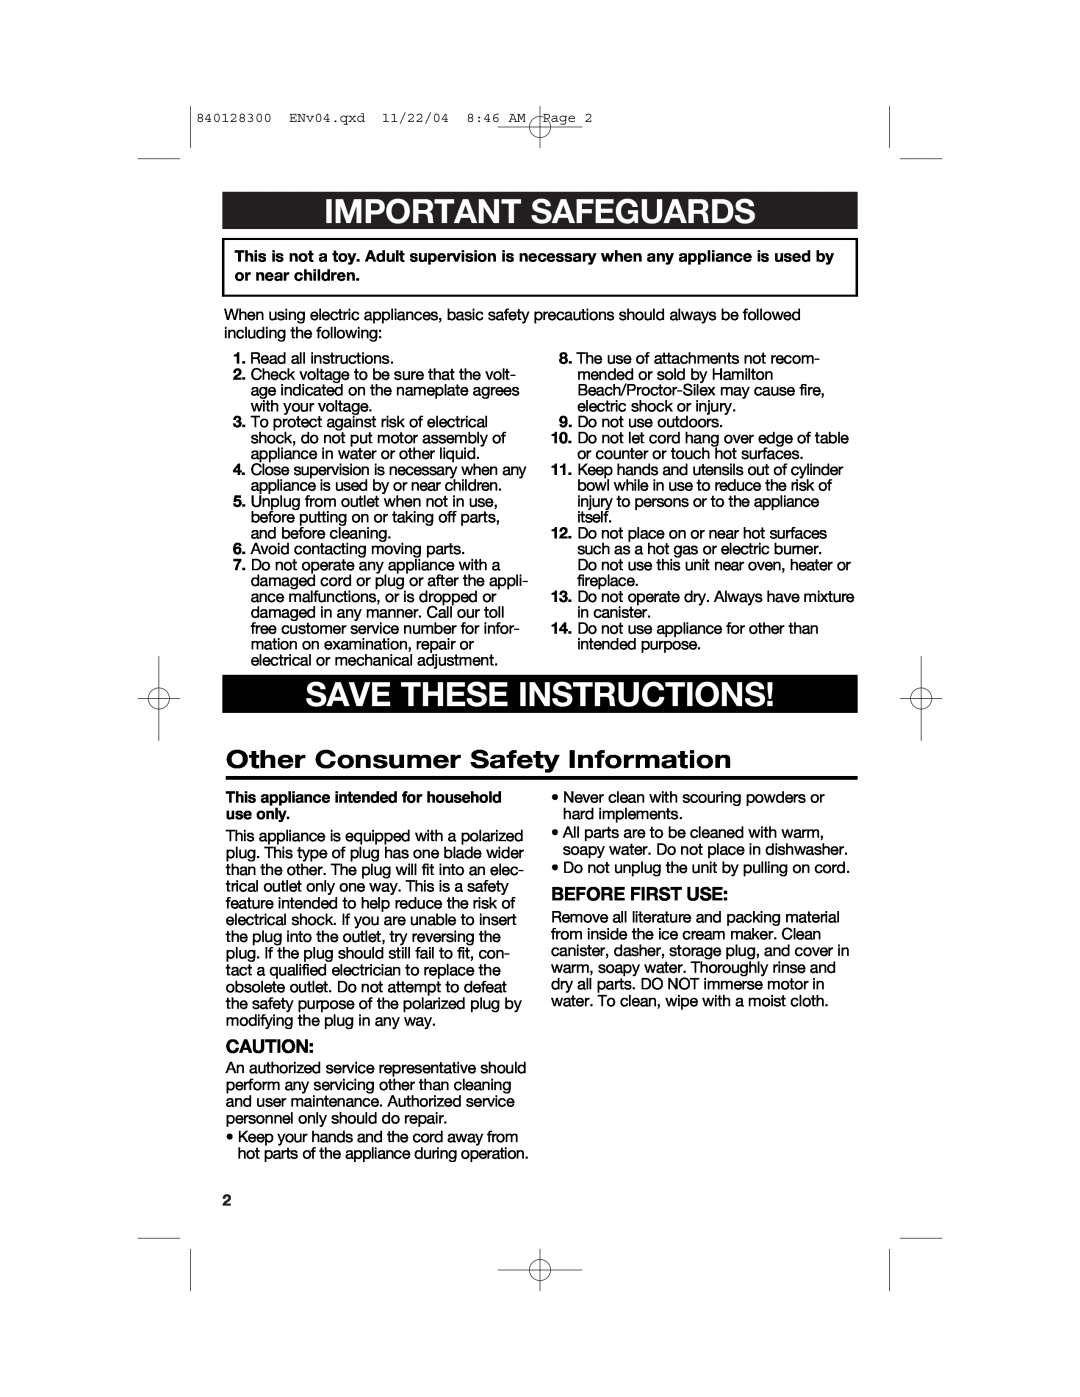 Hamilton Beach 68330 Important Safeguards, Save These Instructions, Other Consumer Safety Information, Before First Use 